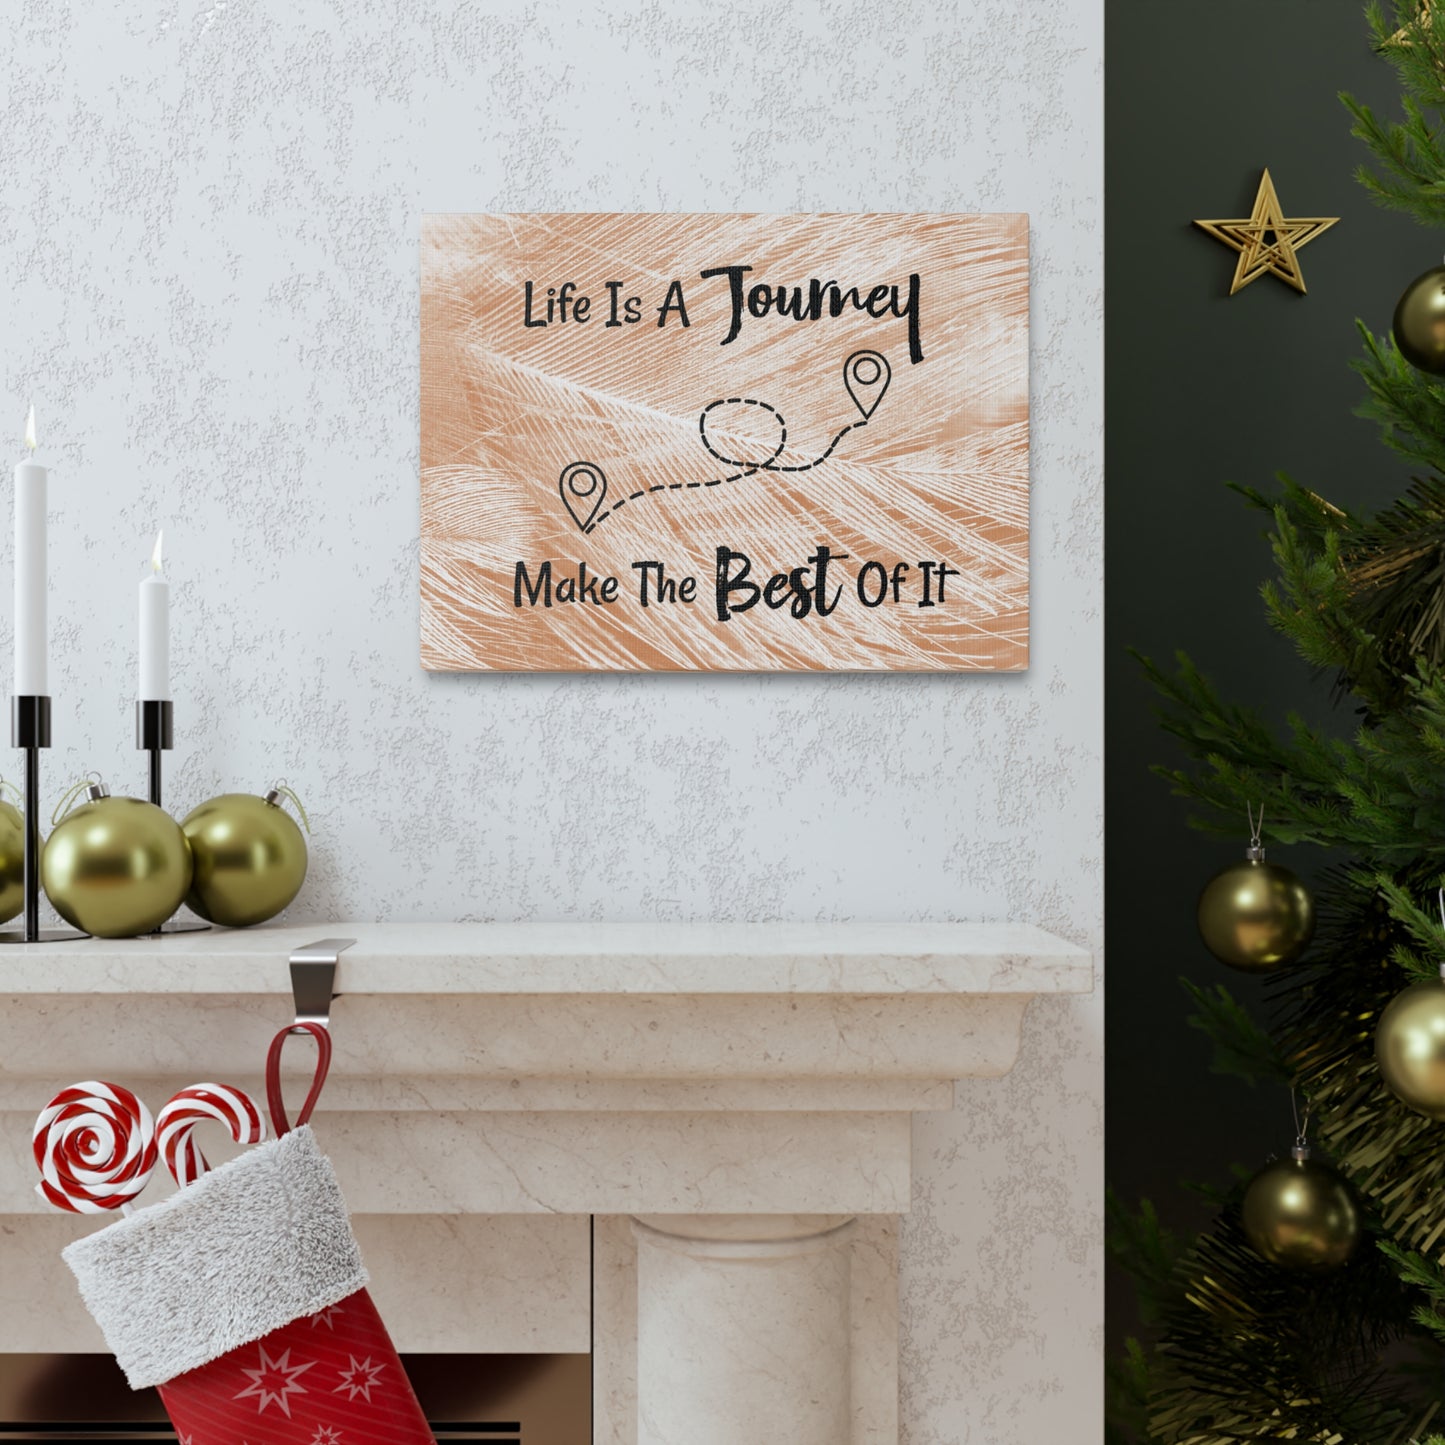 "Life Is A Journey, Make The Best Of It" Wall Art - Weave Got Gifts - Unique Gifts You Won’t Find Anywhere Else!